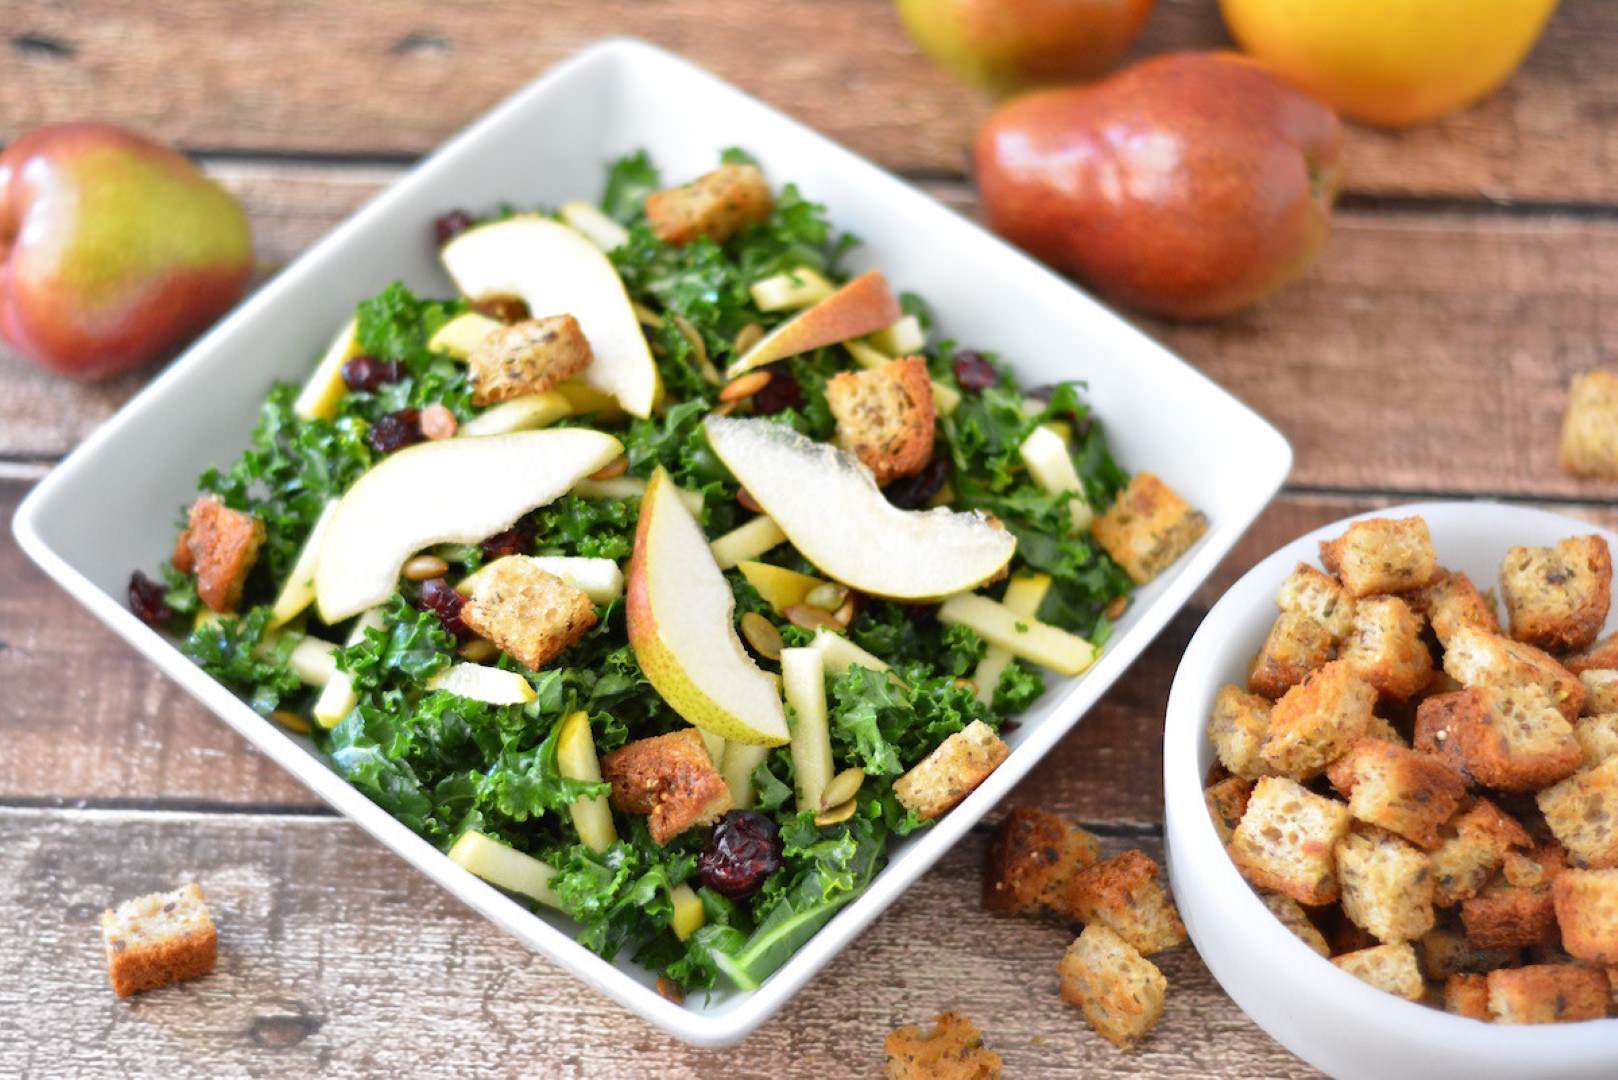 Three Bakers Homemade Croutons & Kale Salad 1